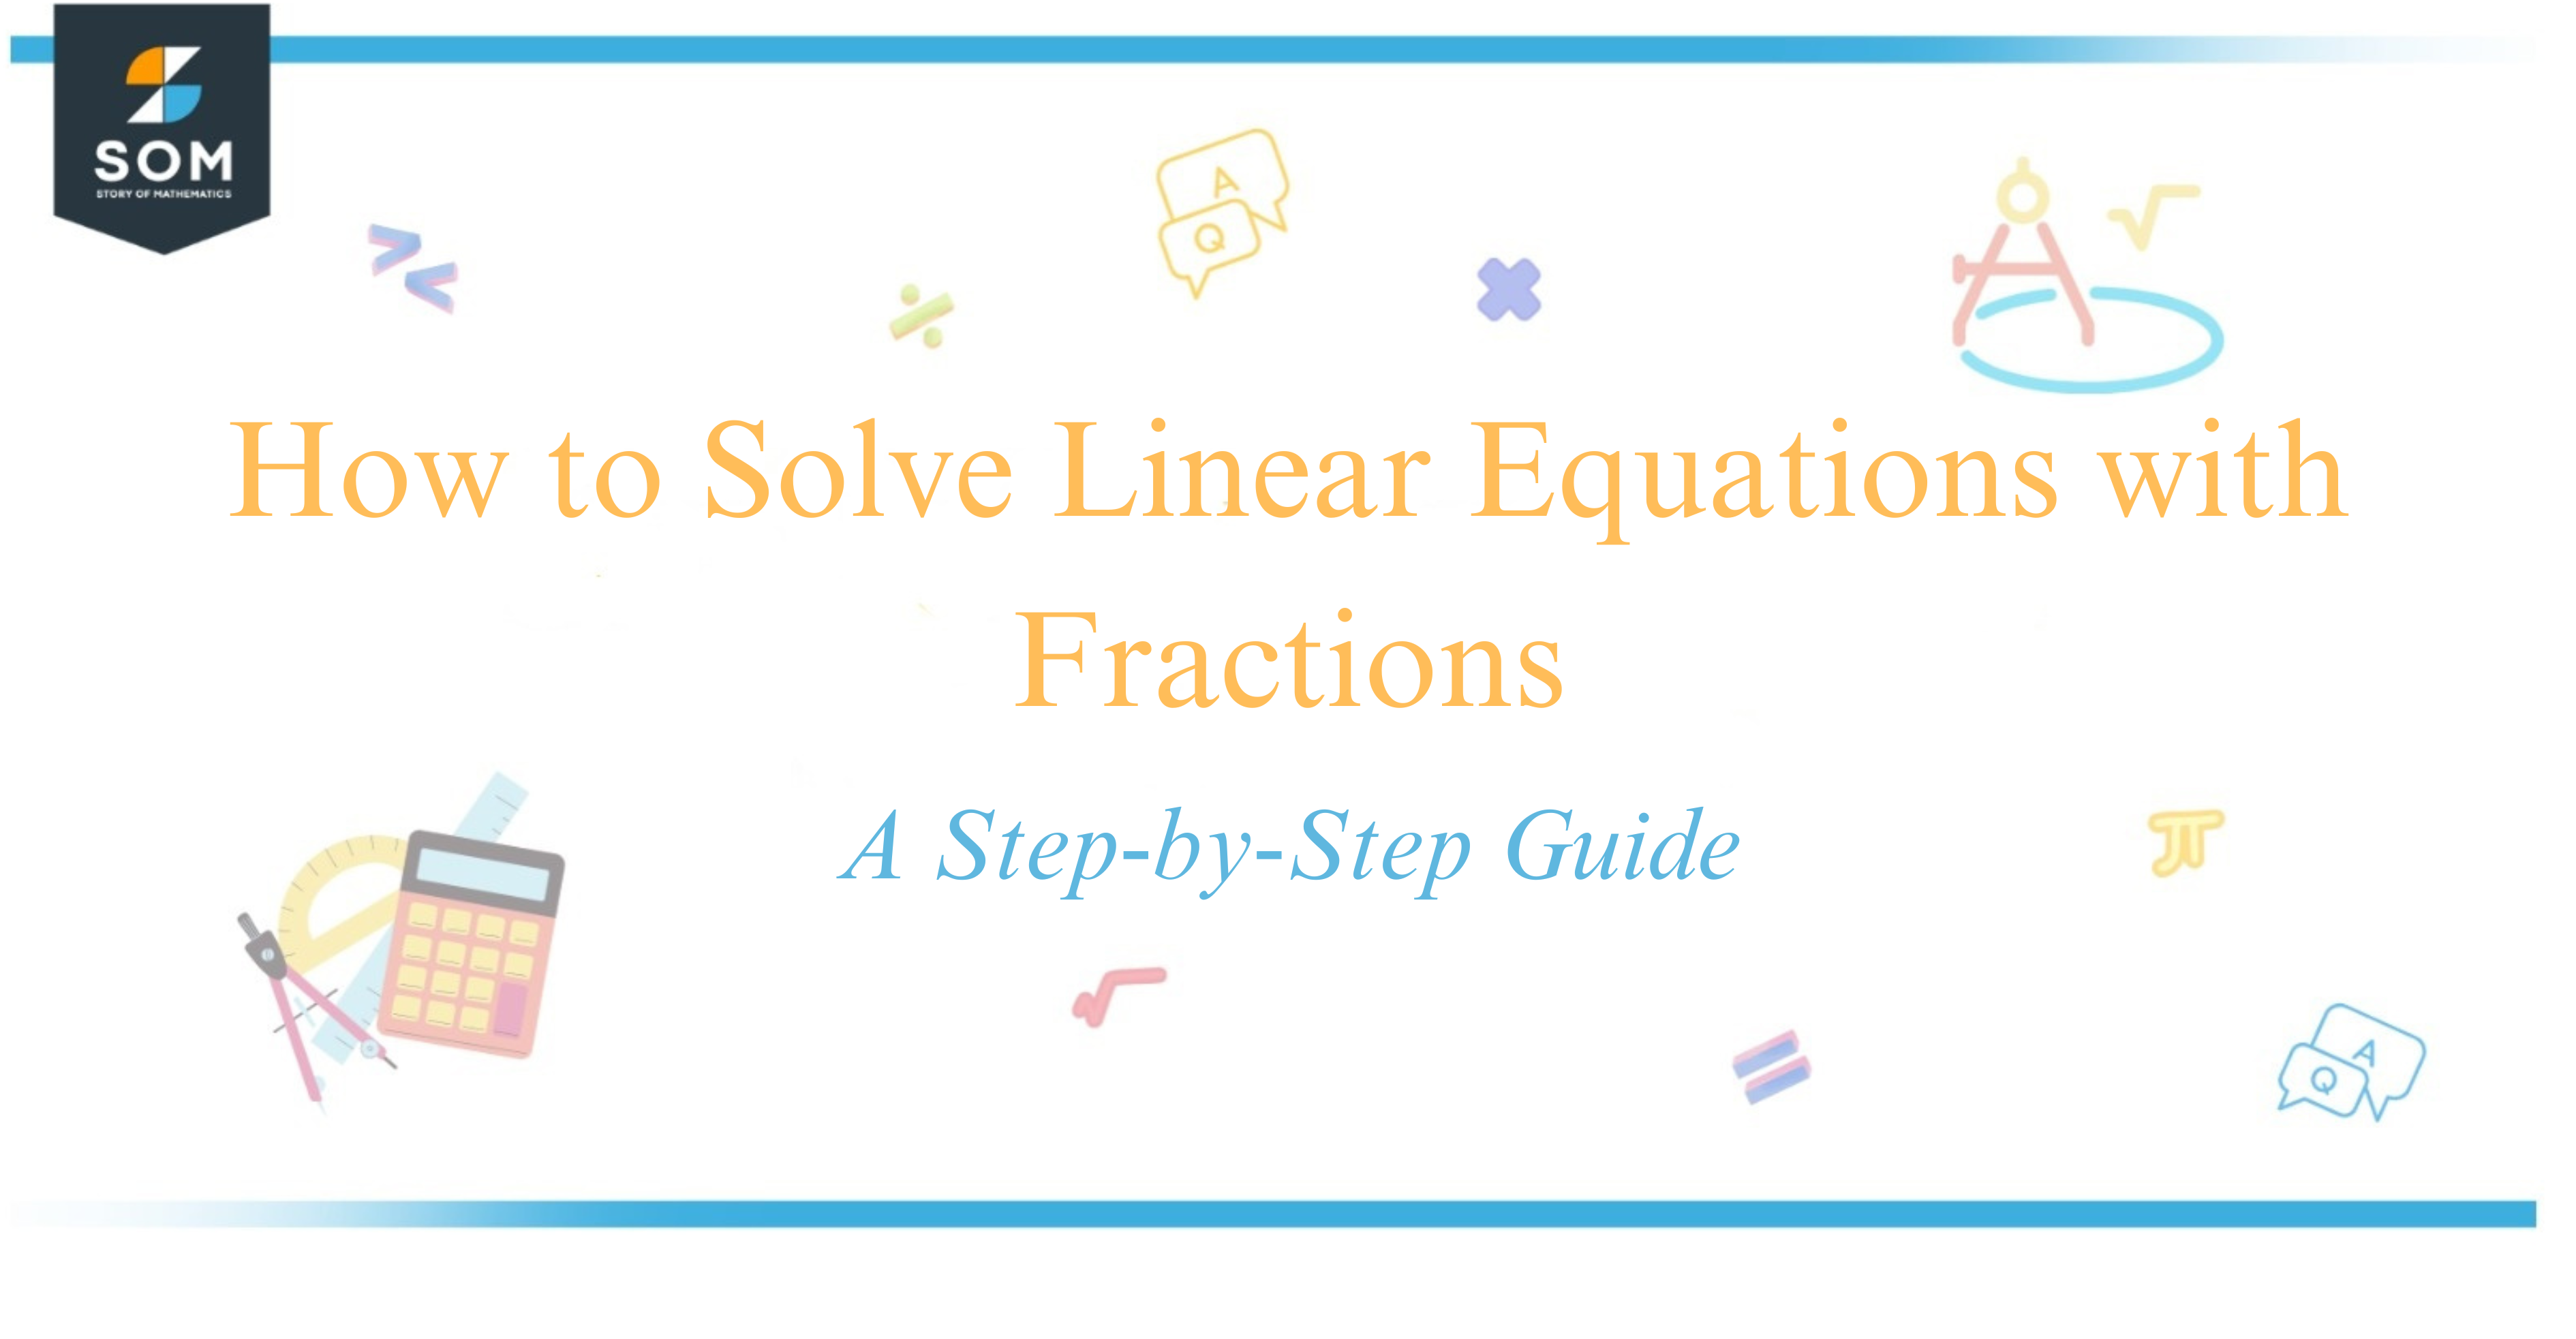 How to Solve Linear Equations with Fractions A Step-by-Step Guide